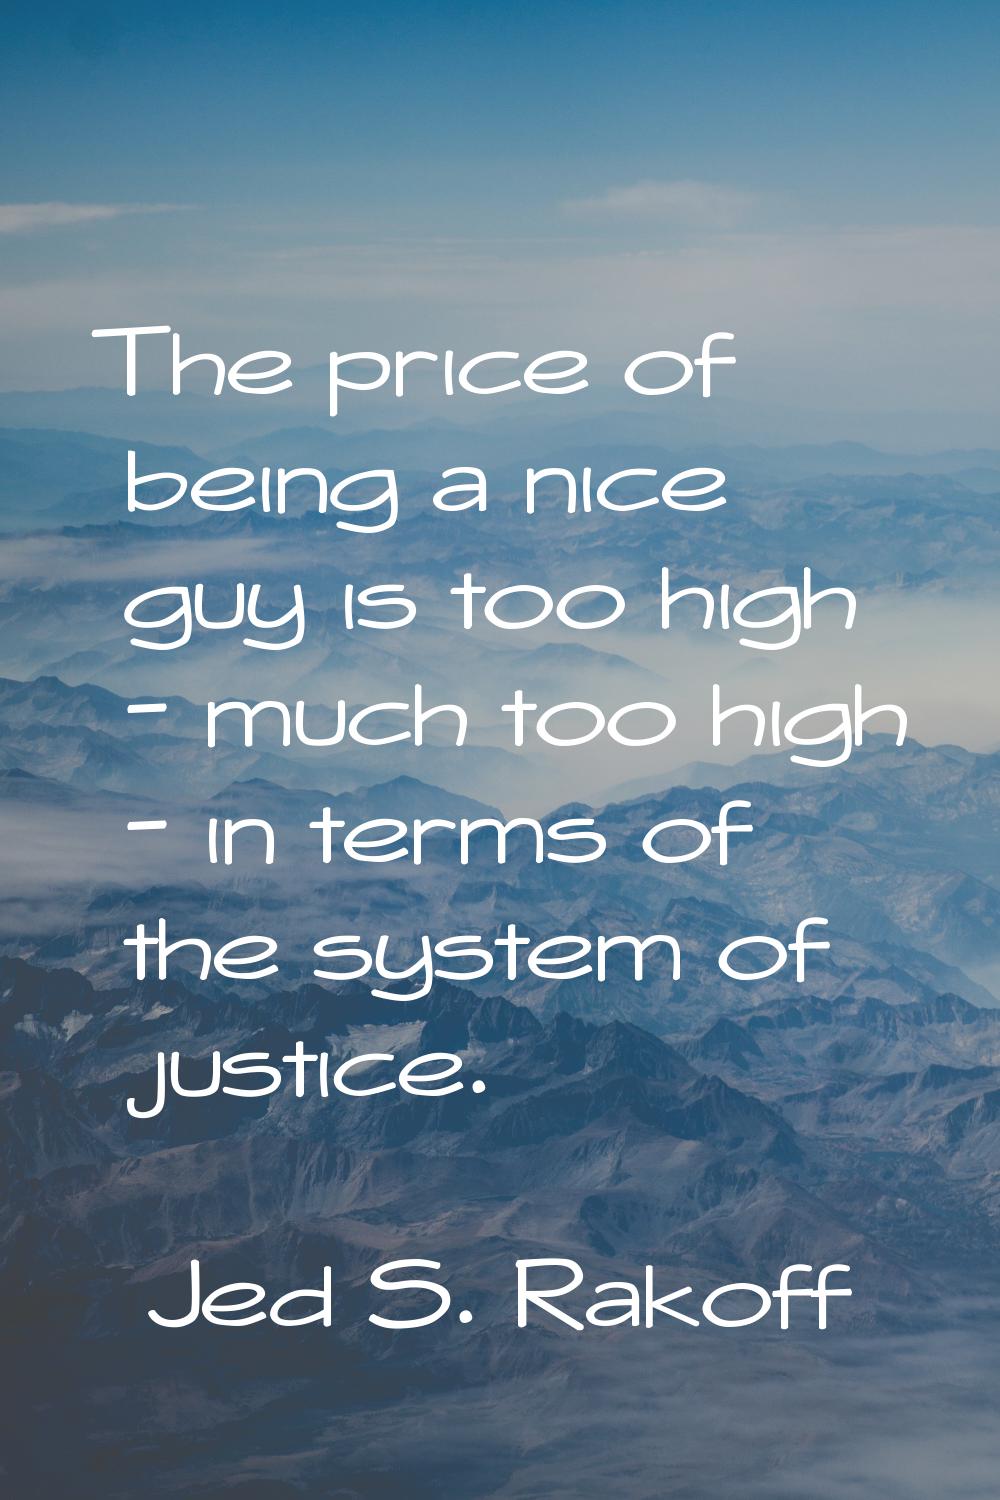 The price of being a nice guy is too high - much too high - in terms of the system of justice.